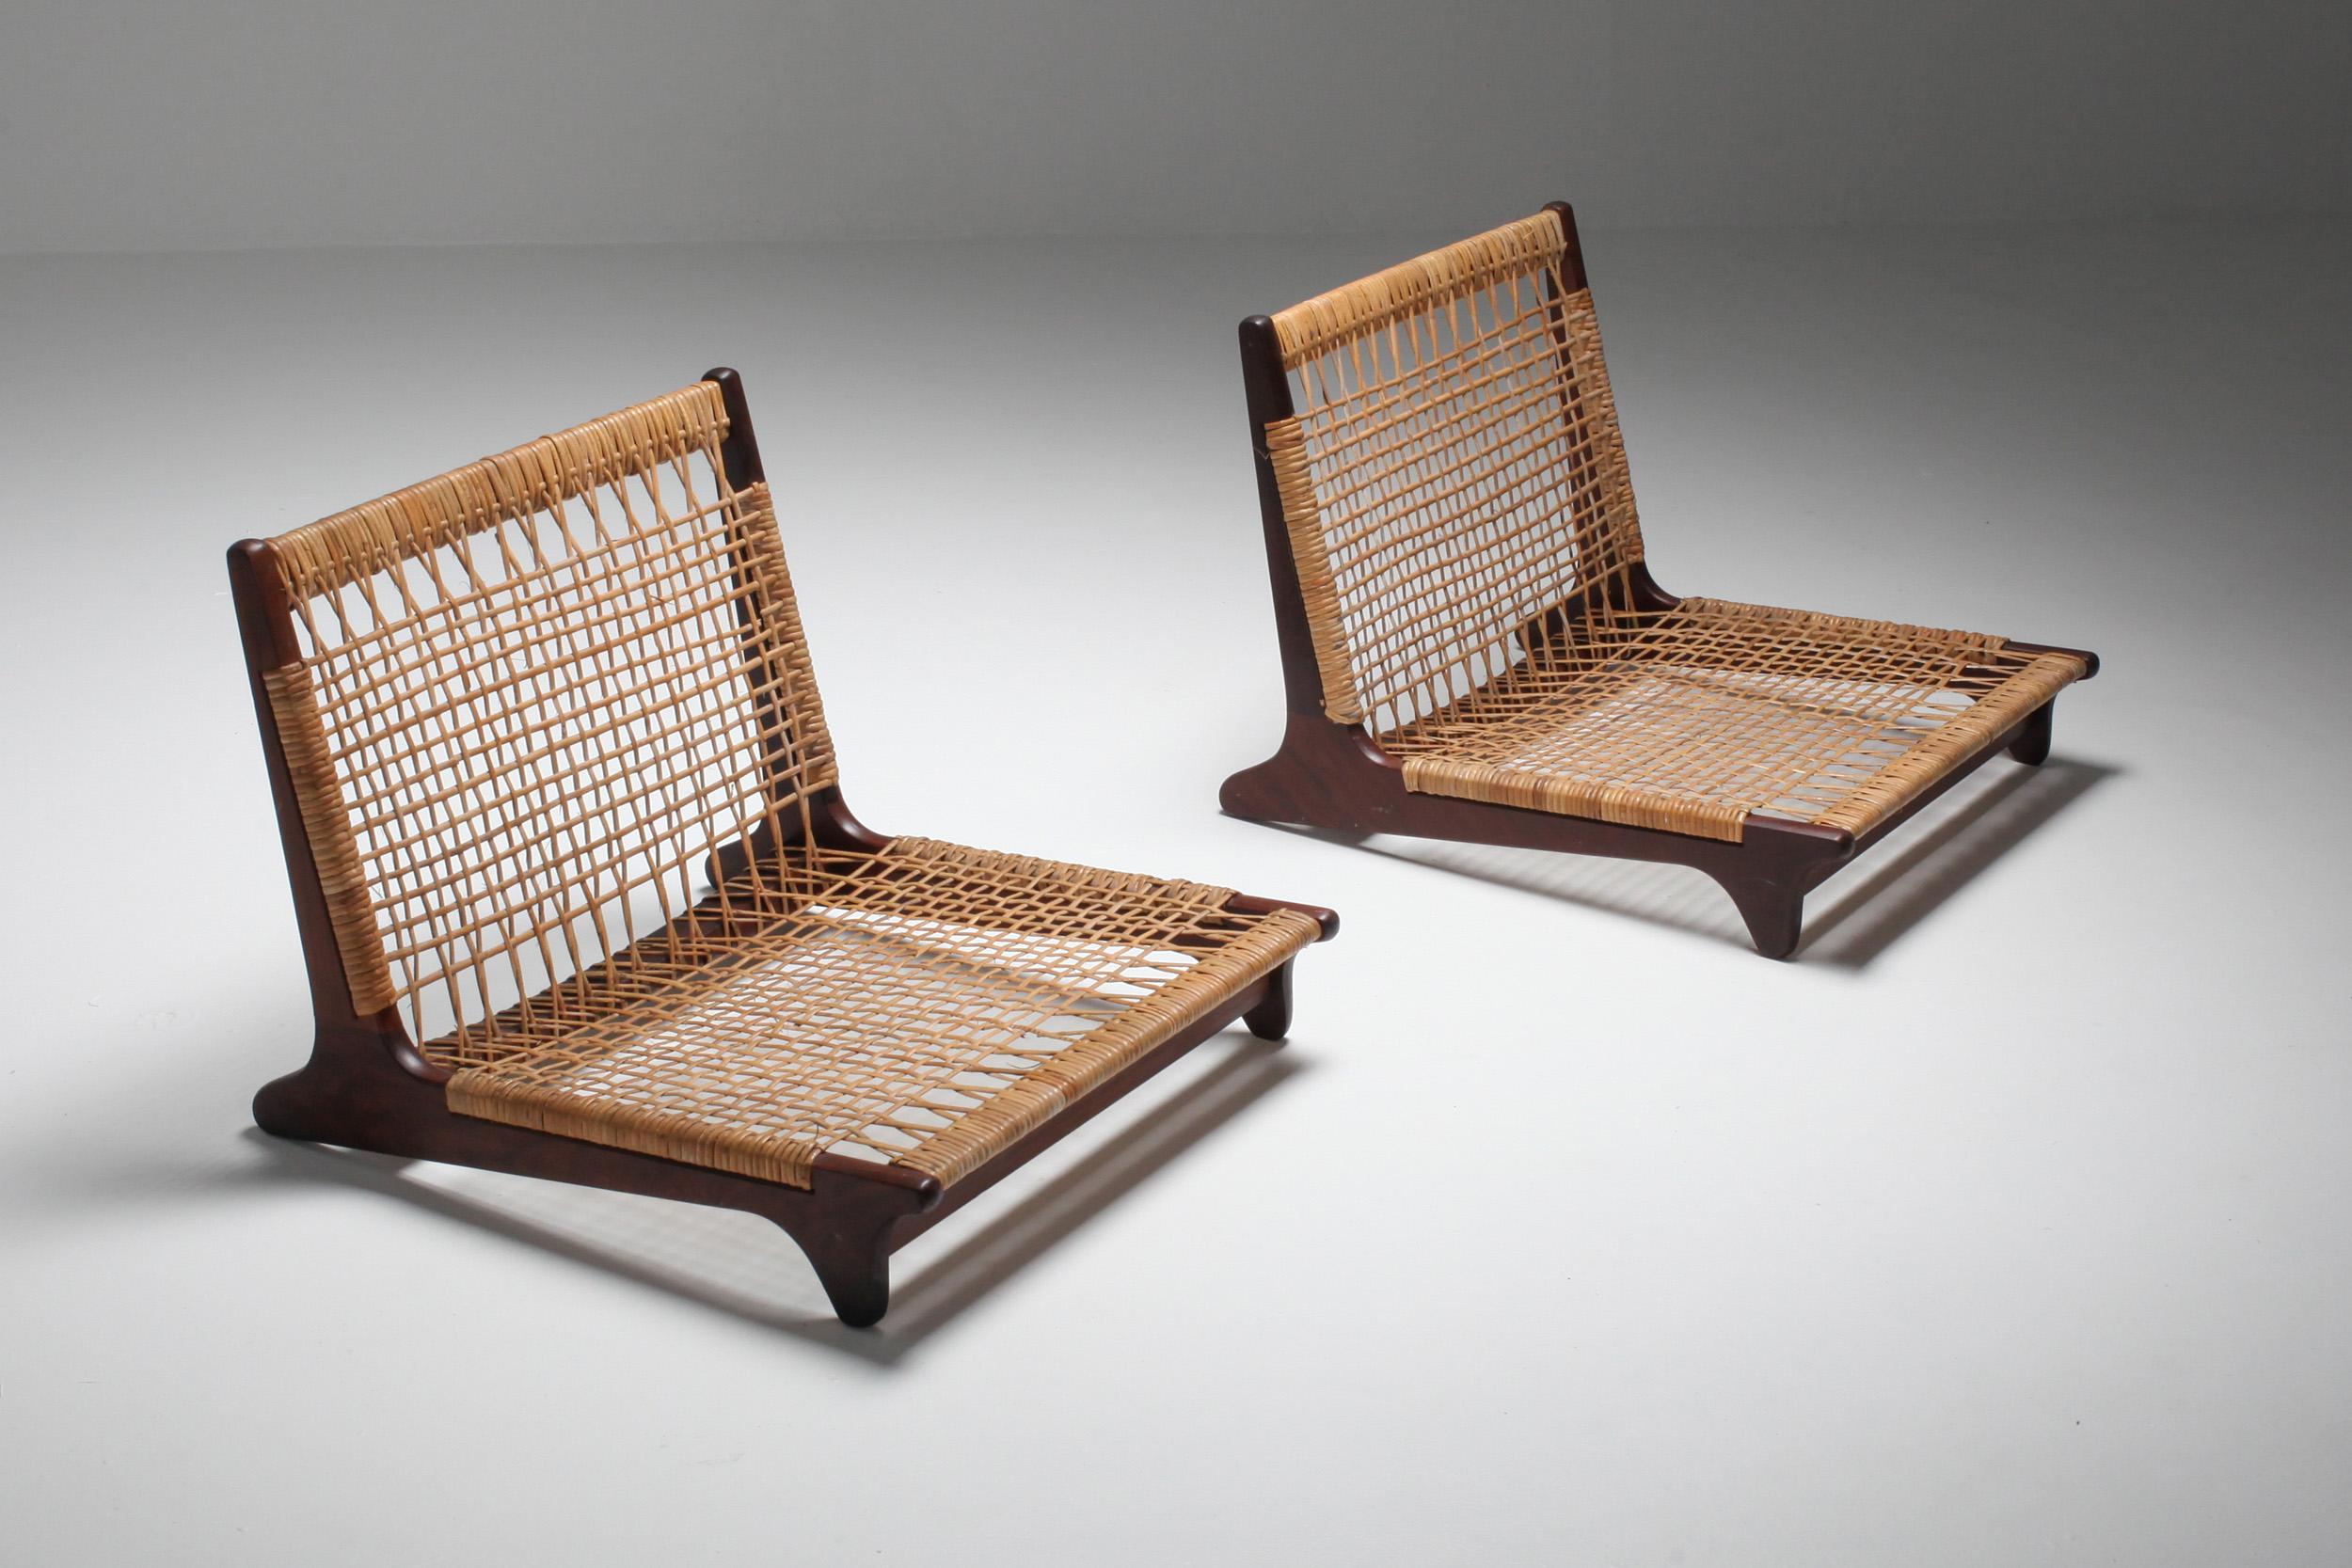 Danish design, teak and wicker, Hans olsen, 1960

Pair of stained teak frame ultra-low loungers with woven cane seats in great original condition. An An absolutely enchanting example of Danish and Japanese design aesthetics.
    